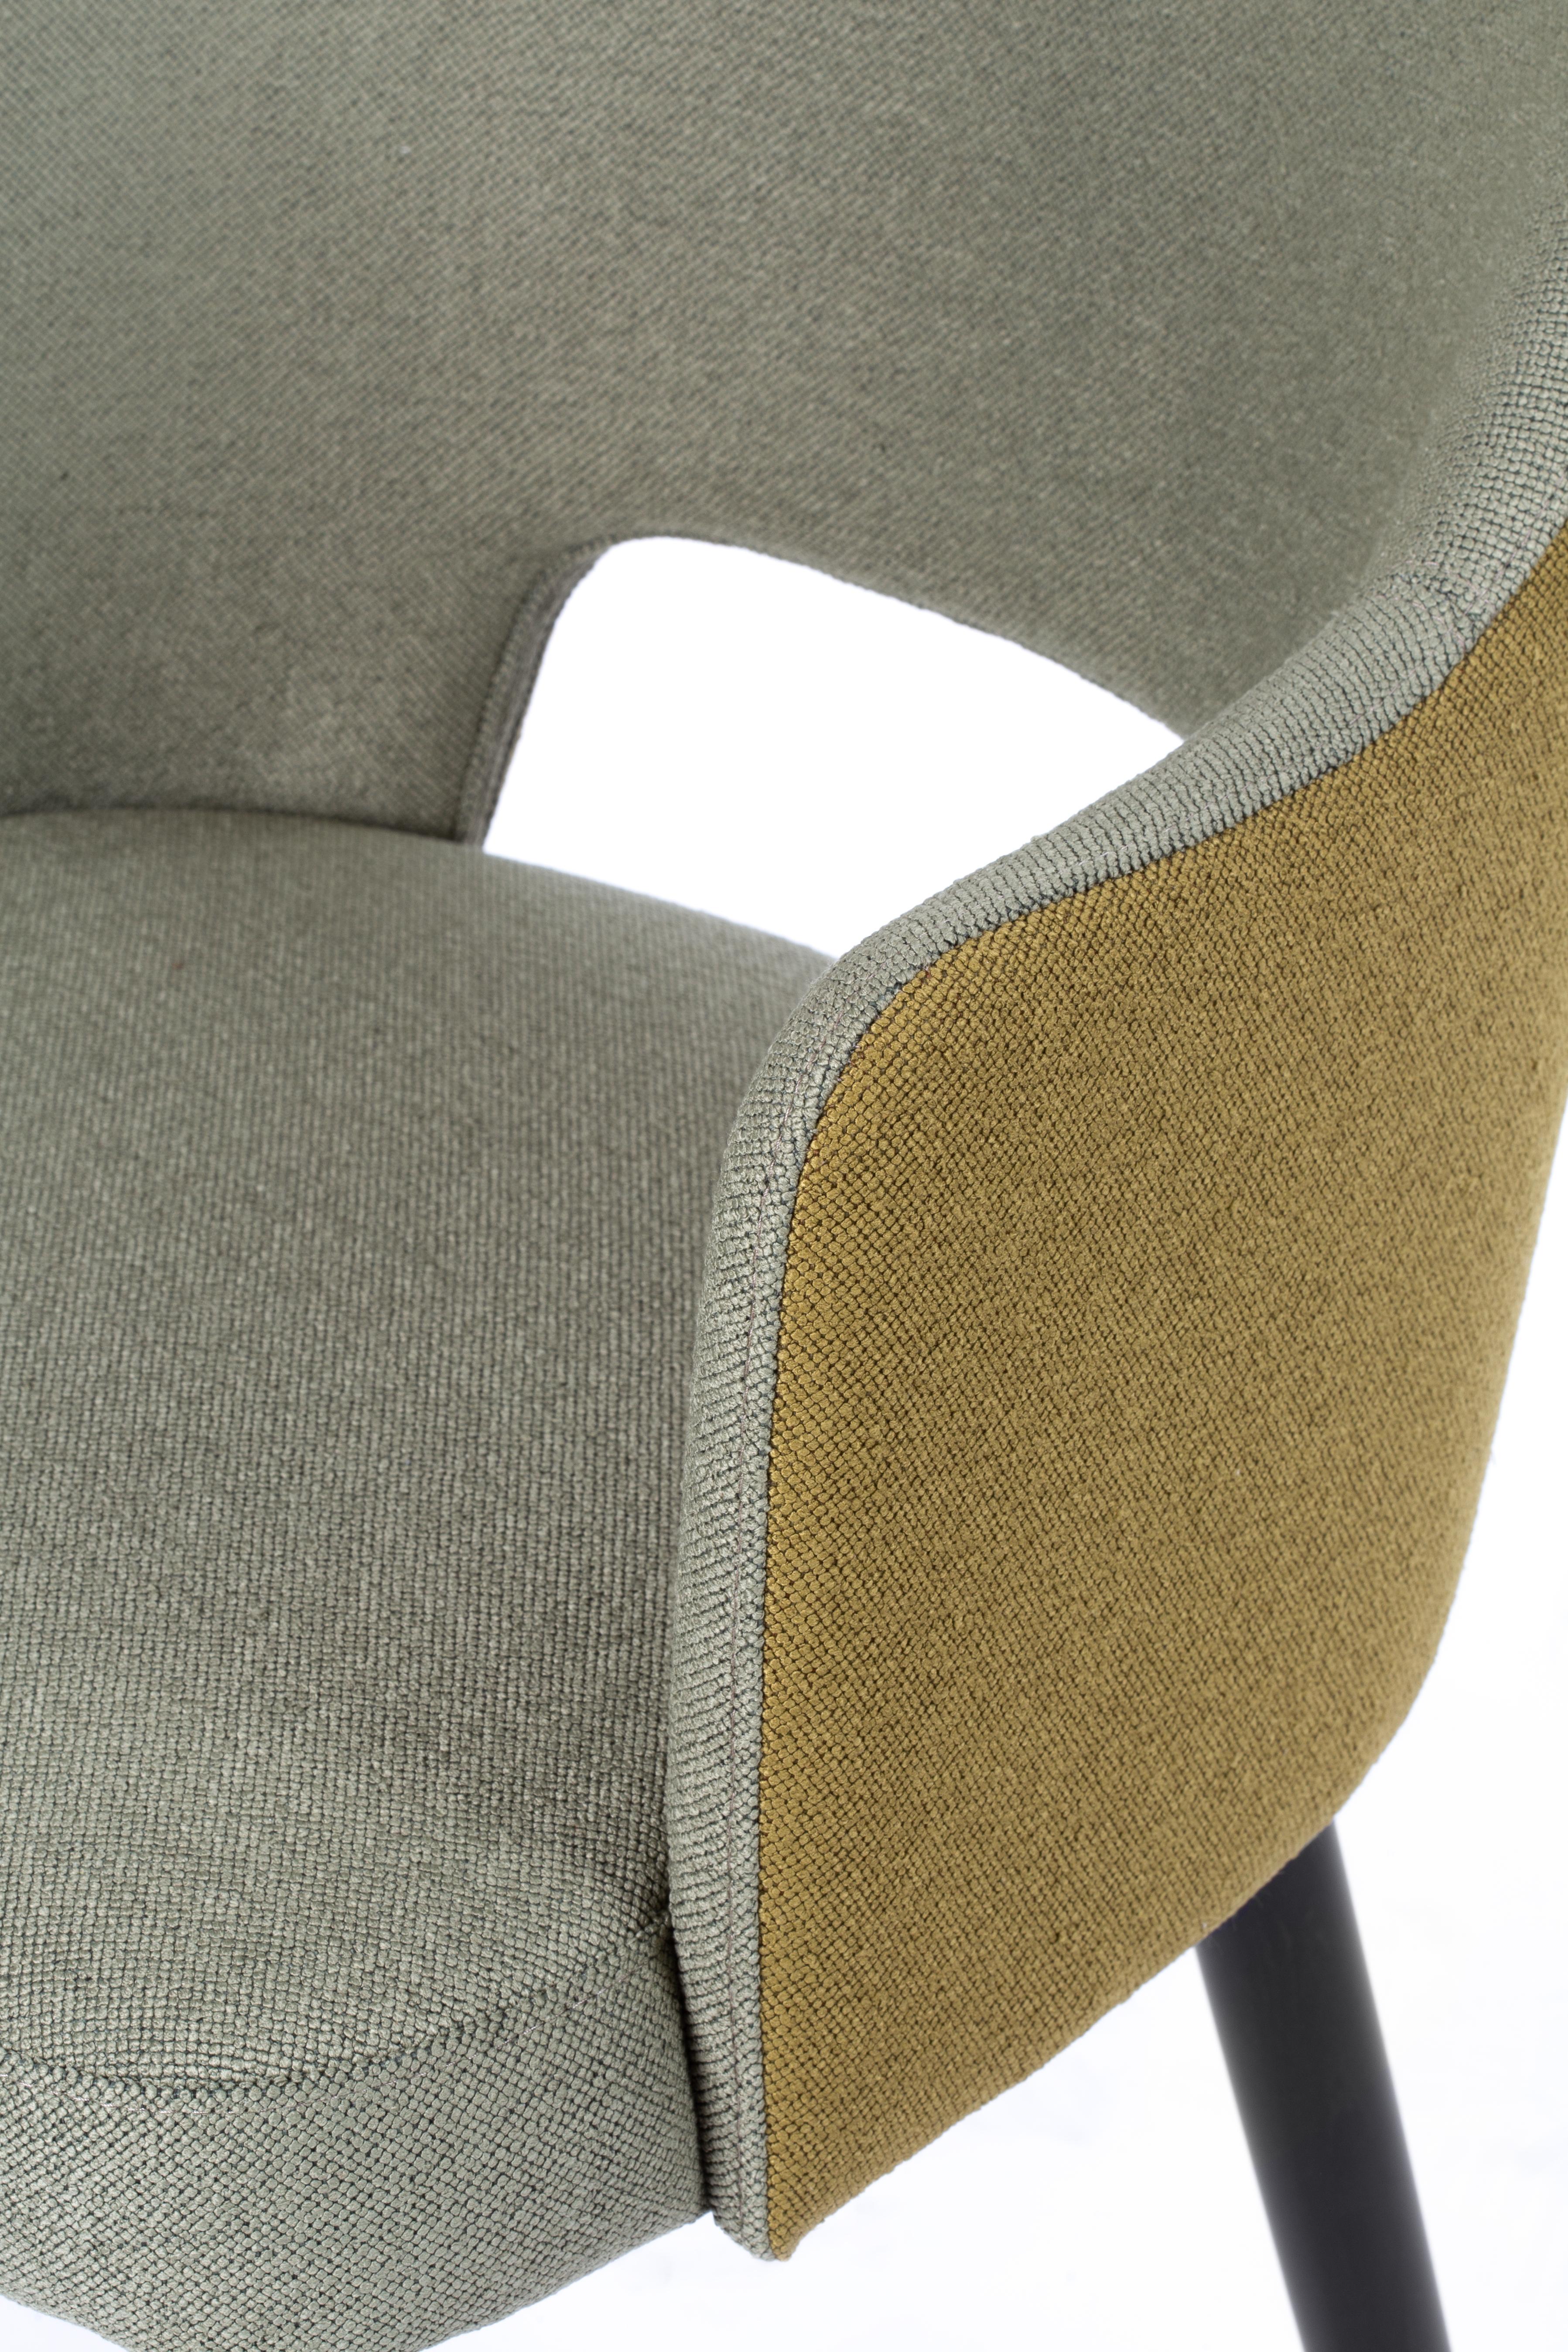 Hand-Crafted 21st Century Ary Chair, Free Life Fabric and Wood, Made in Italy by Hebanon For Sale